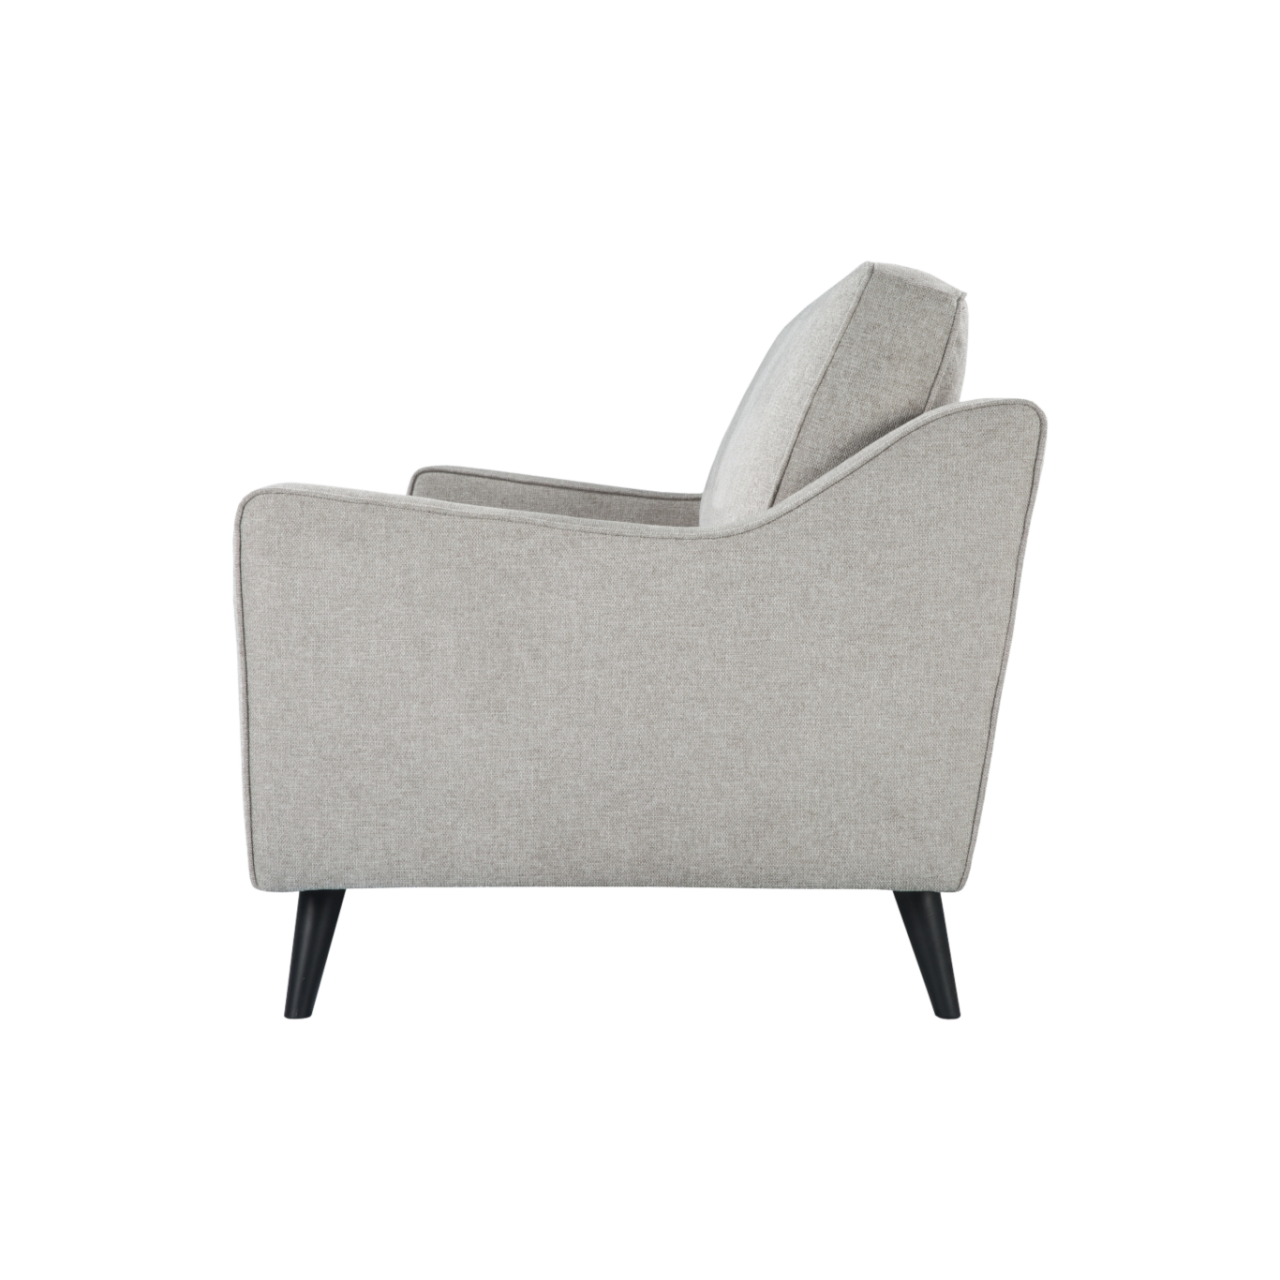 side view of simple, modern upholstered 2.5 seater sofa in stone linen